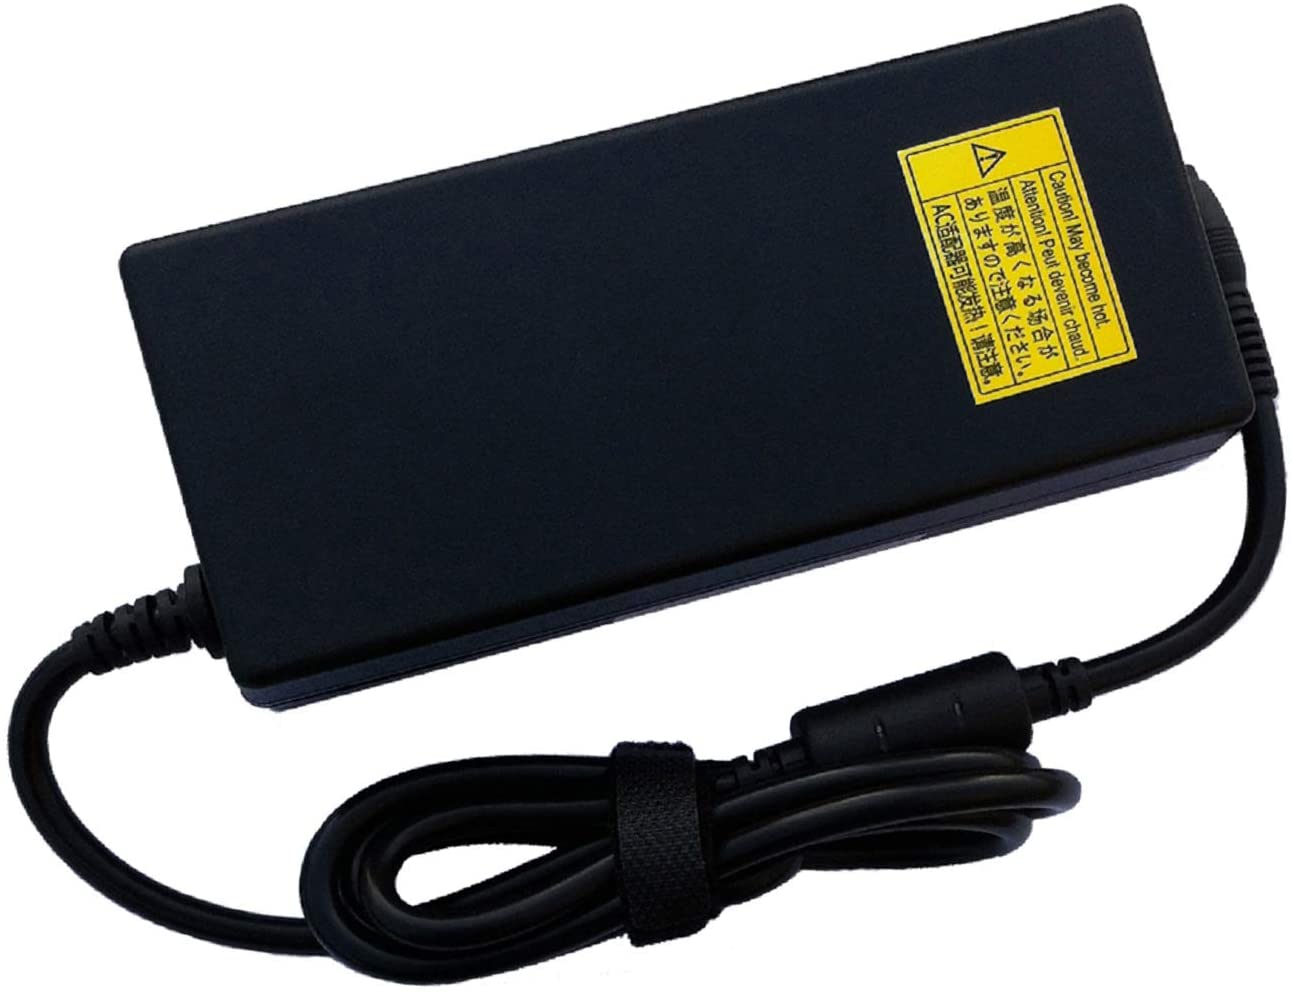 UPBRIGHT NEW Global AC / DC Adapter For QNAP TS-453A-4G-US TS-453A-8G-US Trubo NAS TS-453A TS453A NAS Server Power Supply Cord Cable PS Charger PSU - image 2 of 5